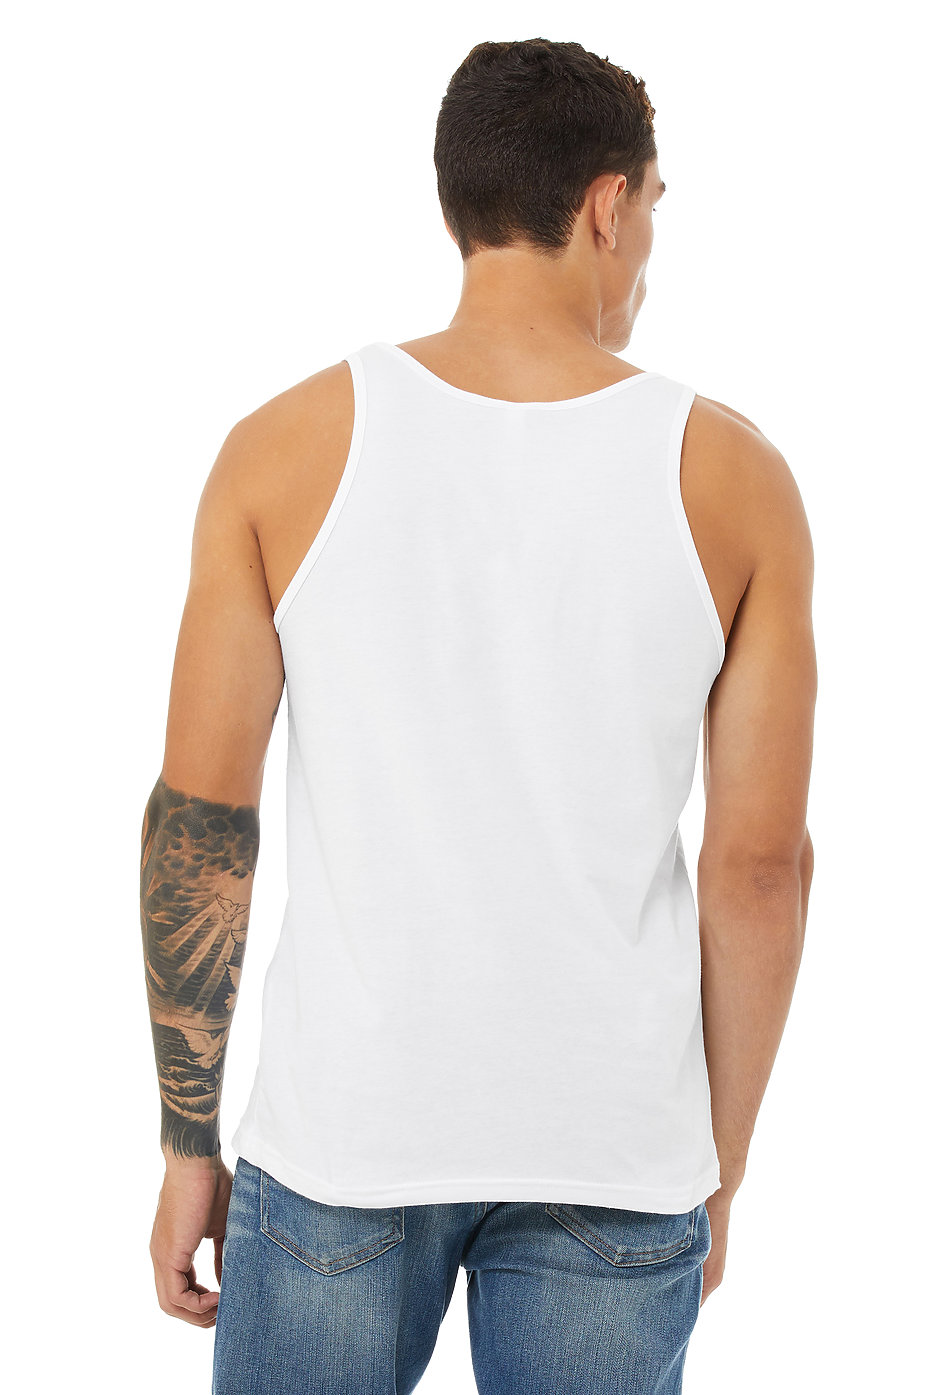 We The People Unisex Jersey Tank